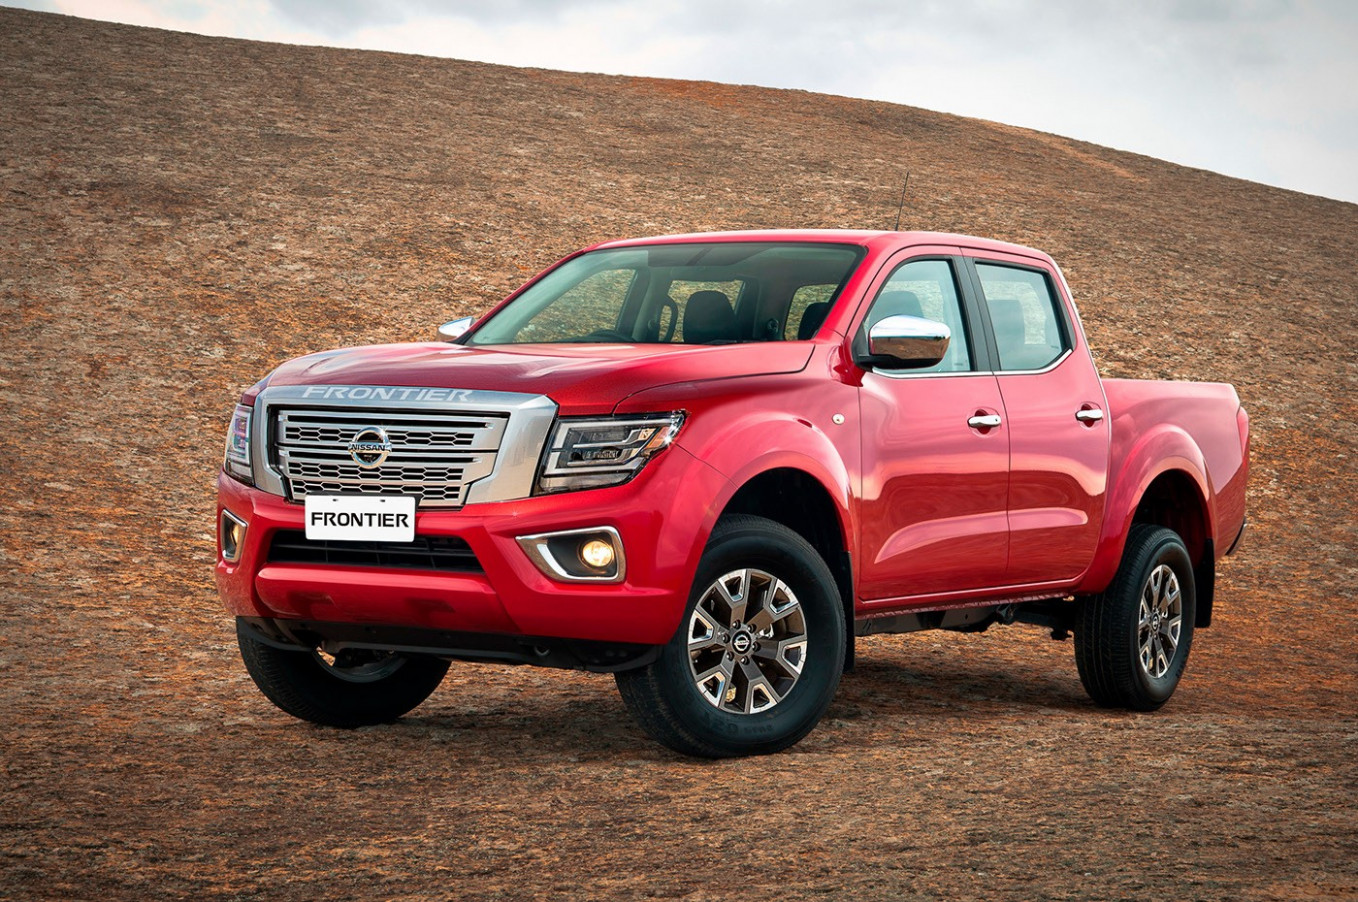 Pictures When Will The 2022 Nissan Frontier Be Available